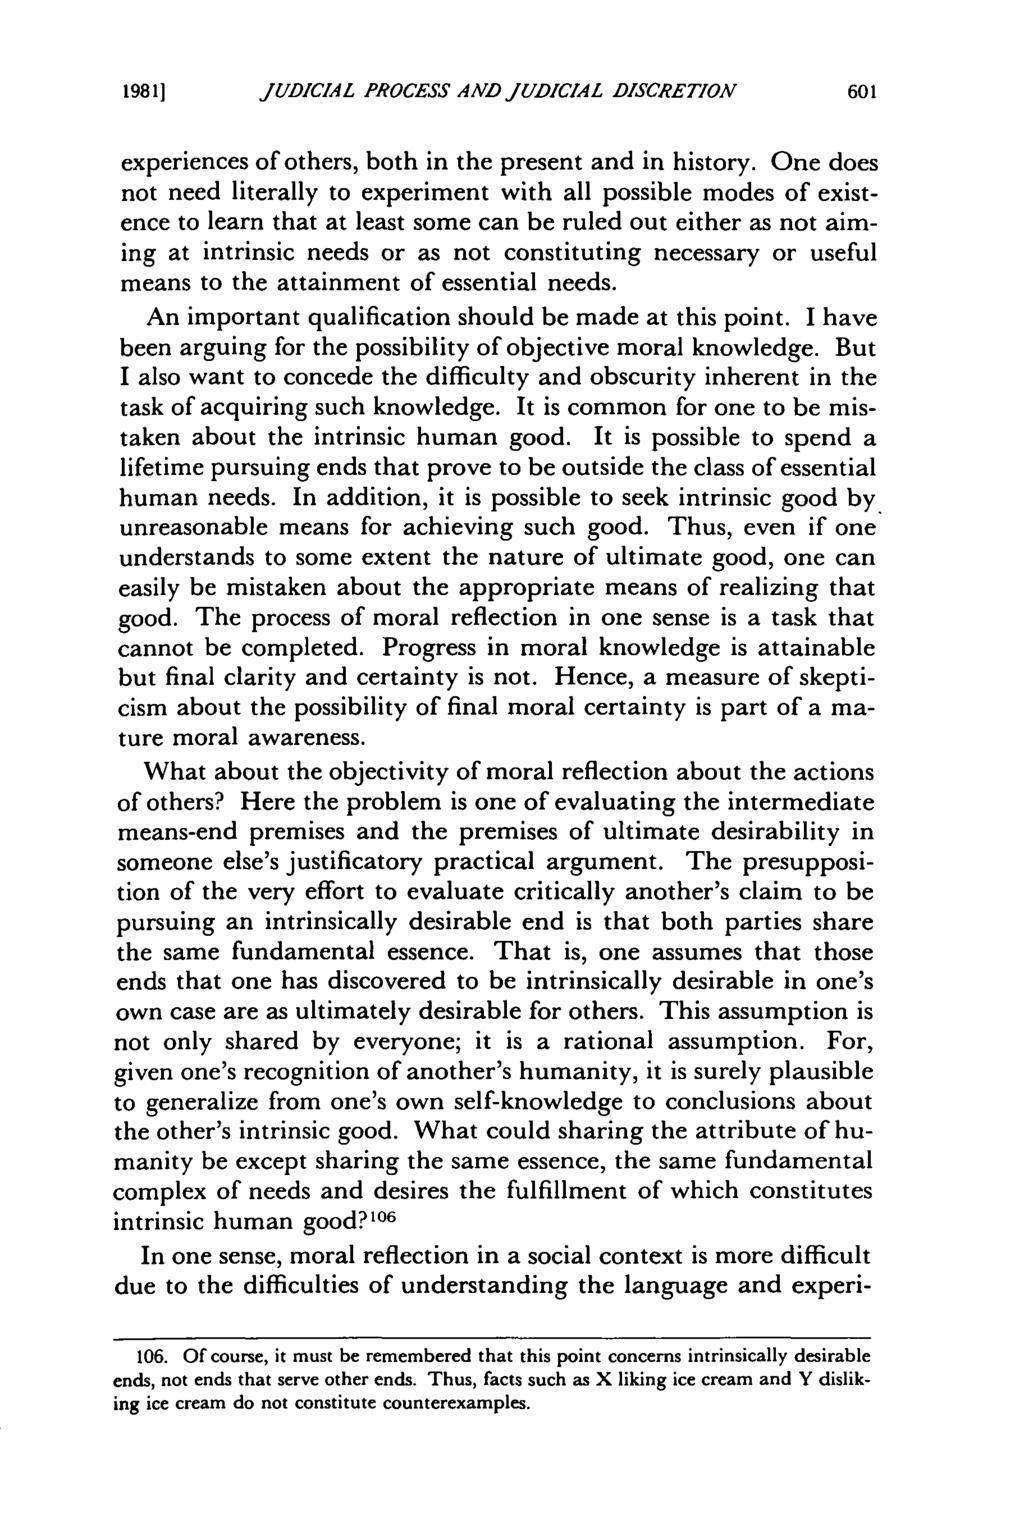 19811 Pannier: The Nature of the Judicial Process and Judicial Discretion JUDICIAL PROCESS AND JUDICIAL DISCRETION experiences of others, both in the present and in history.